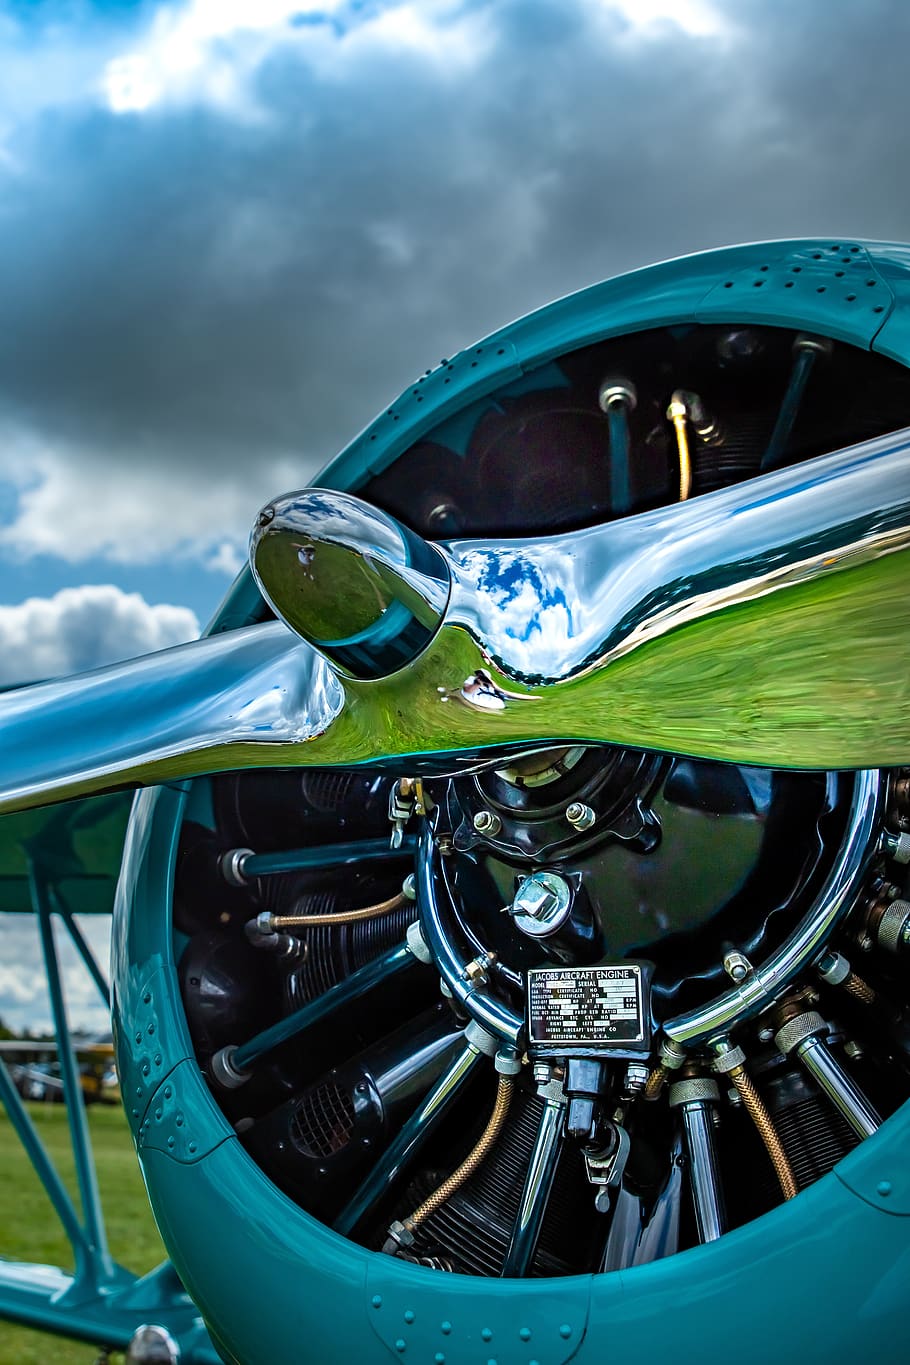 propeller, aircraft, engine, aviation, old, aeroplane, classic